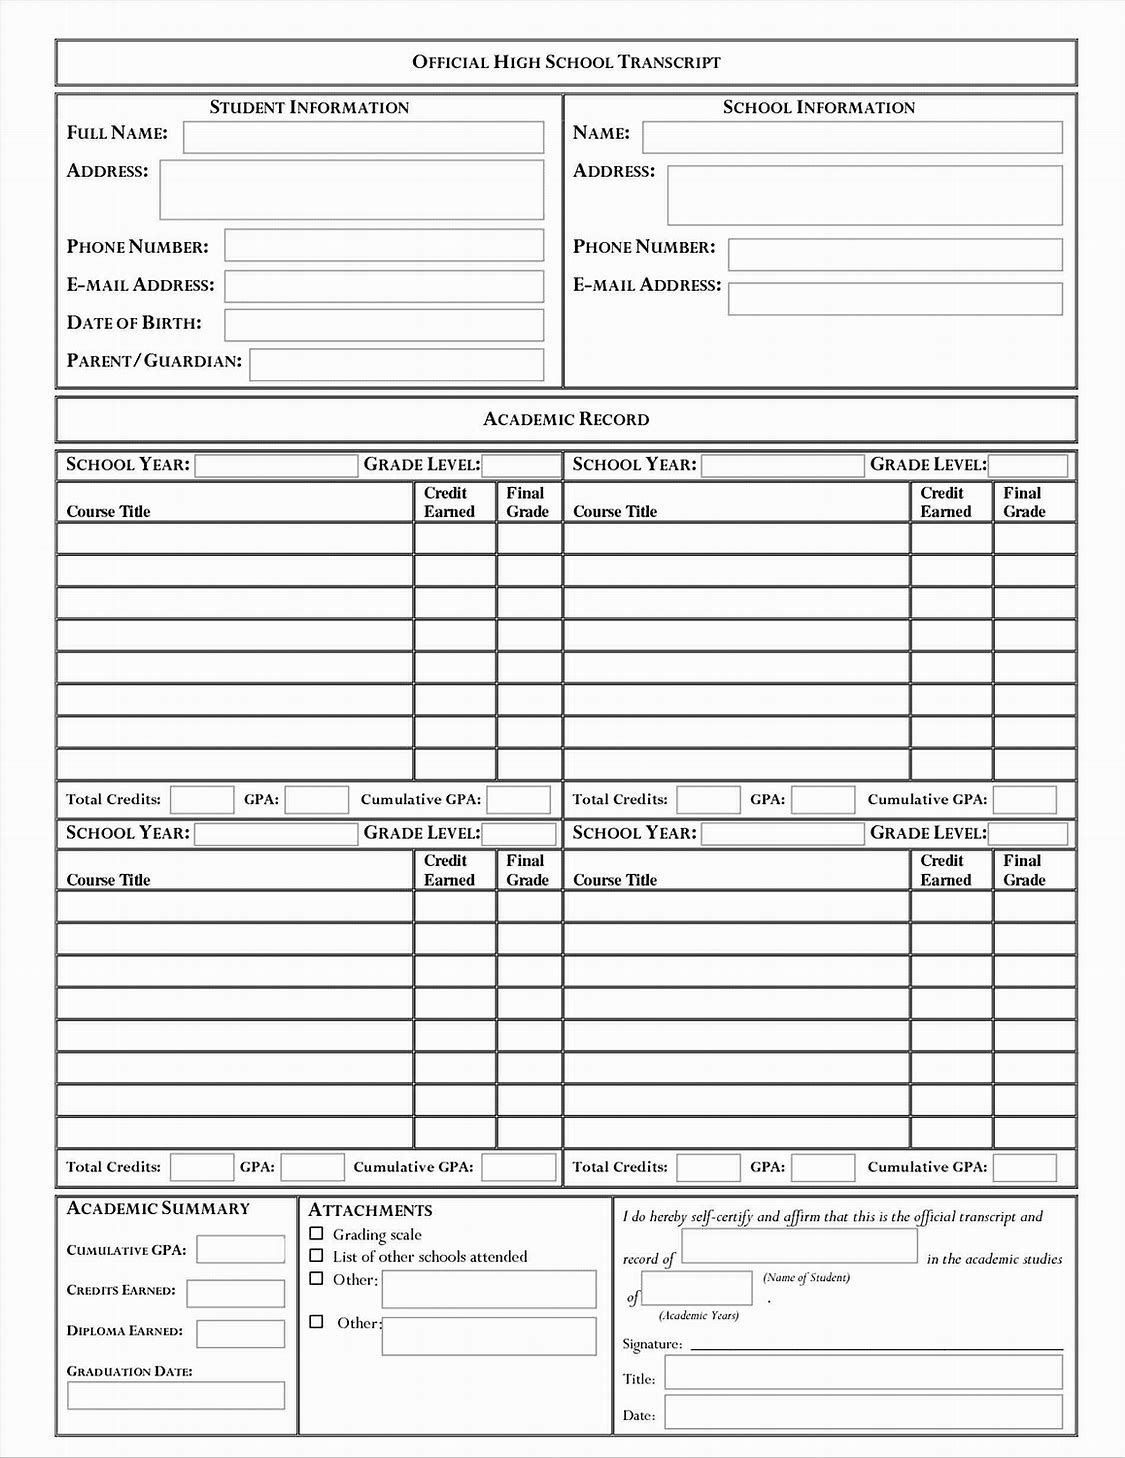 Image Result For Middle School Transcript Template | High Intended For Middle School Report Card Template